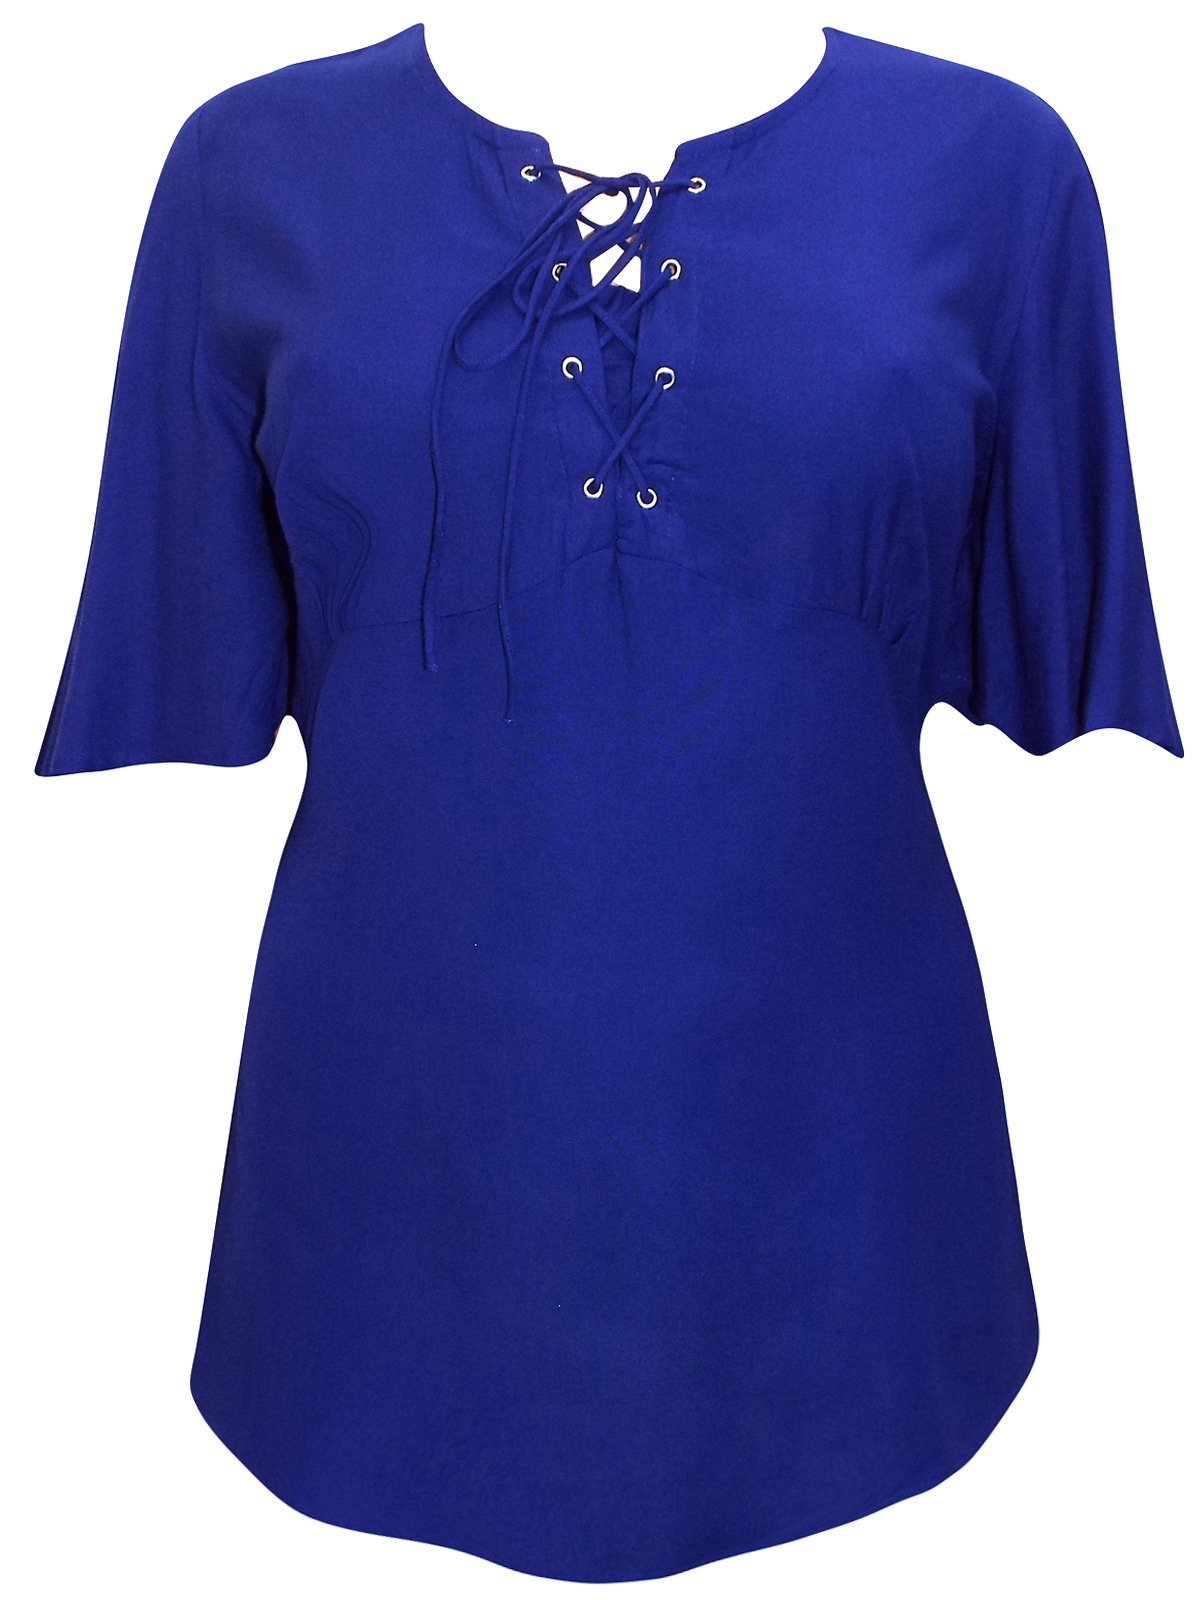 eaonplus BLUE Short Sleeve Lace Up Top - Plus Size 18/20 to 30/32